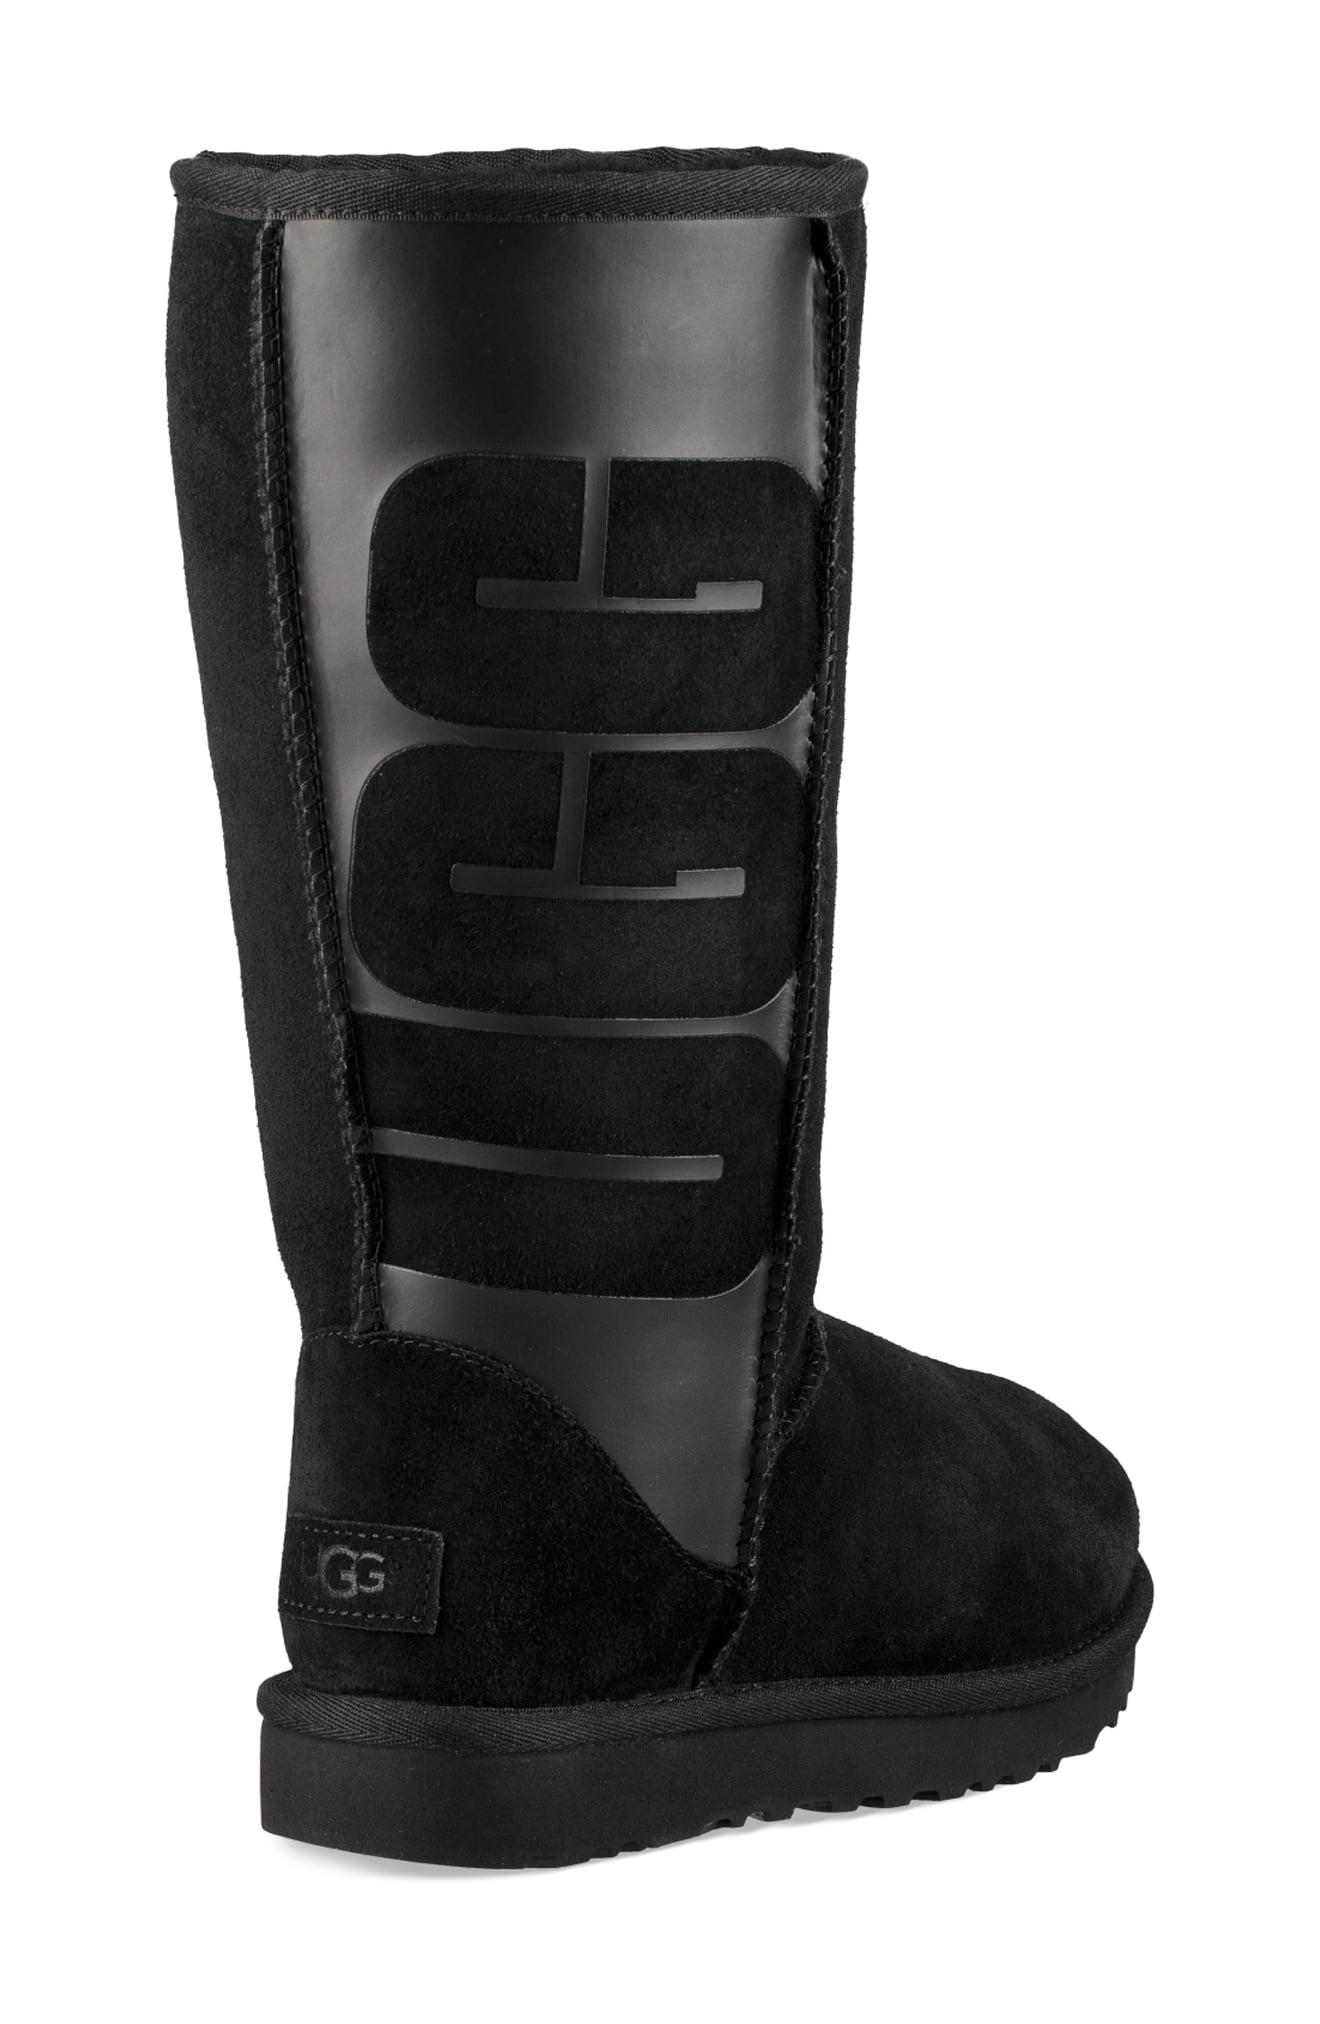 UGG Suede UGG Sparkle Classic Tall Boot in Black Suede (Black) - Lyst